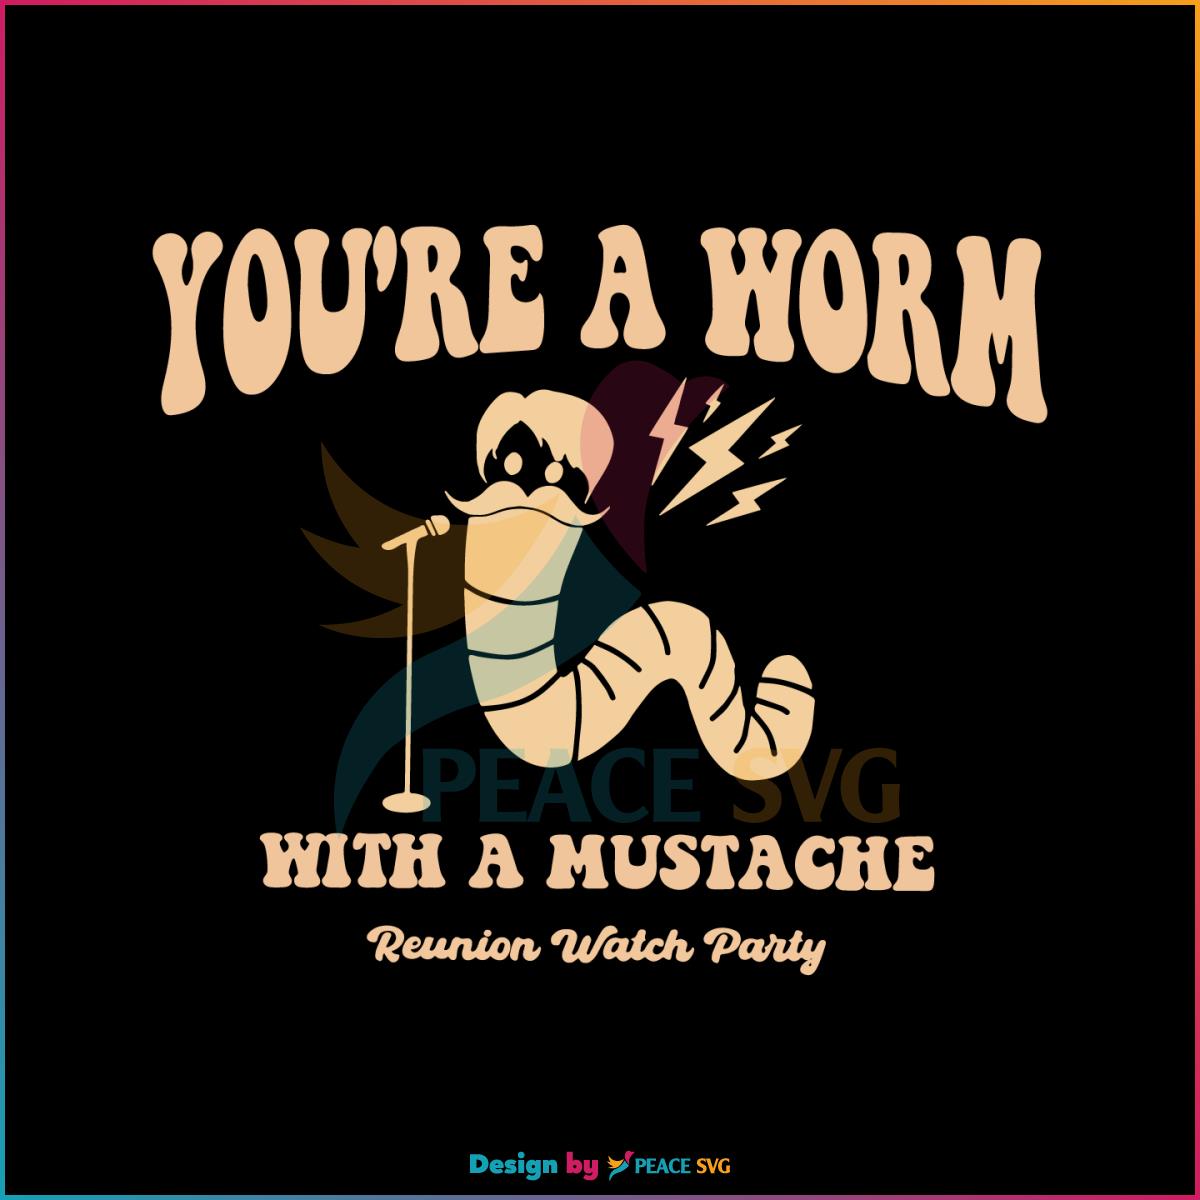 retro-you-are-a-worm-with-a-mustache-svg-cutting-file